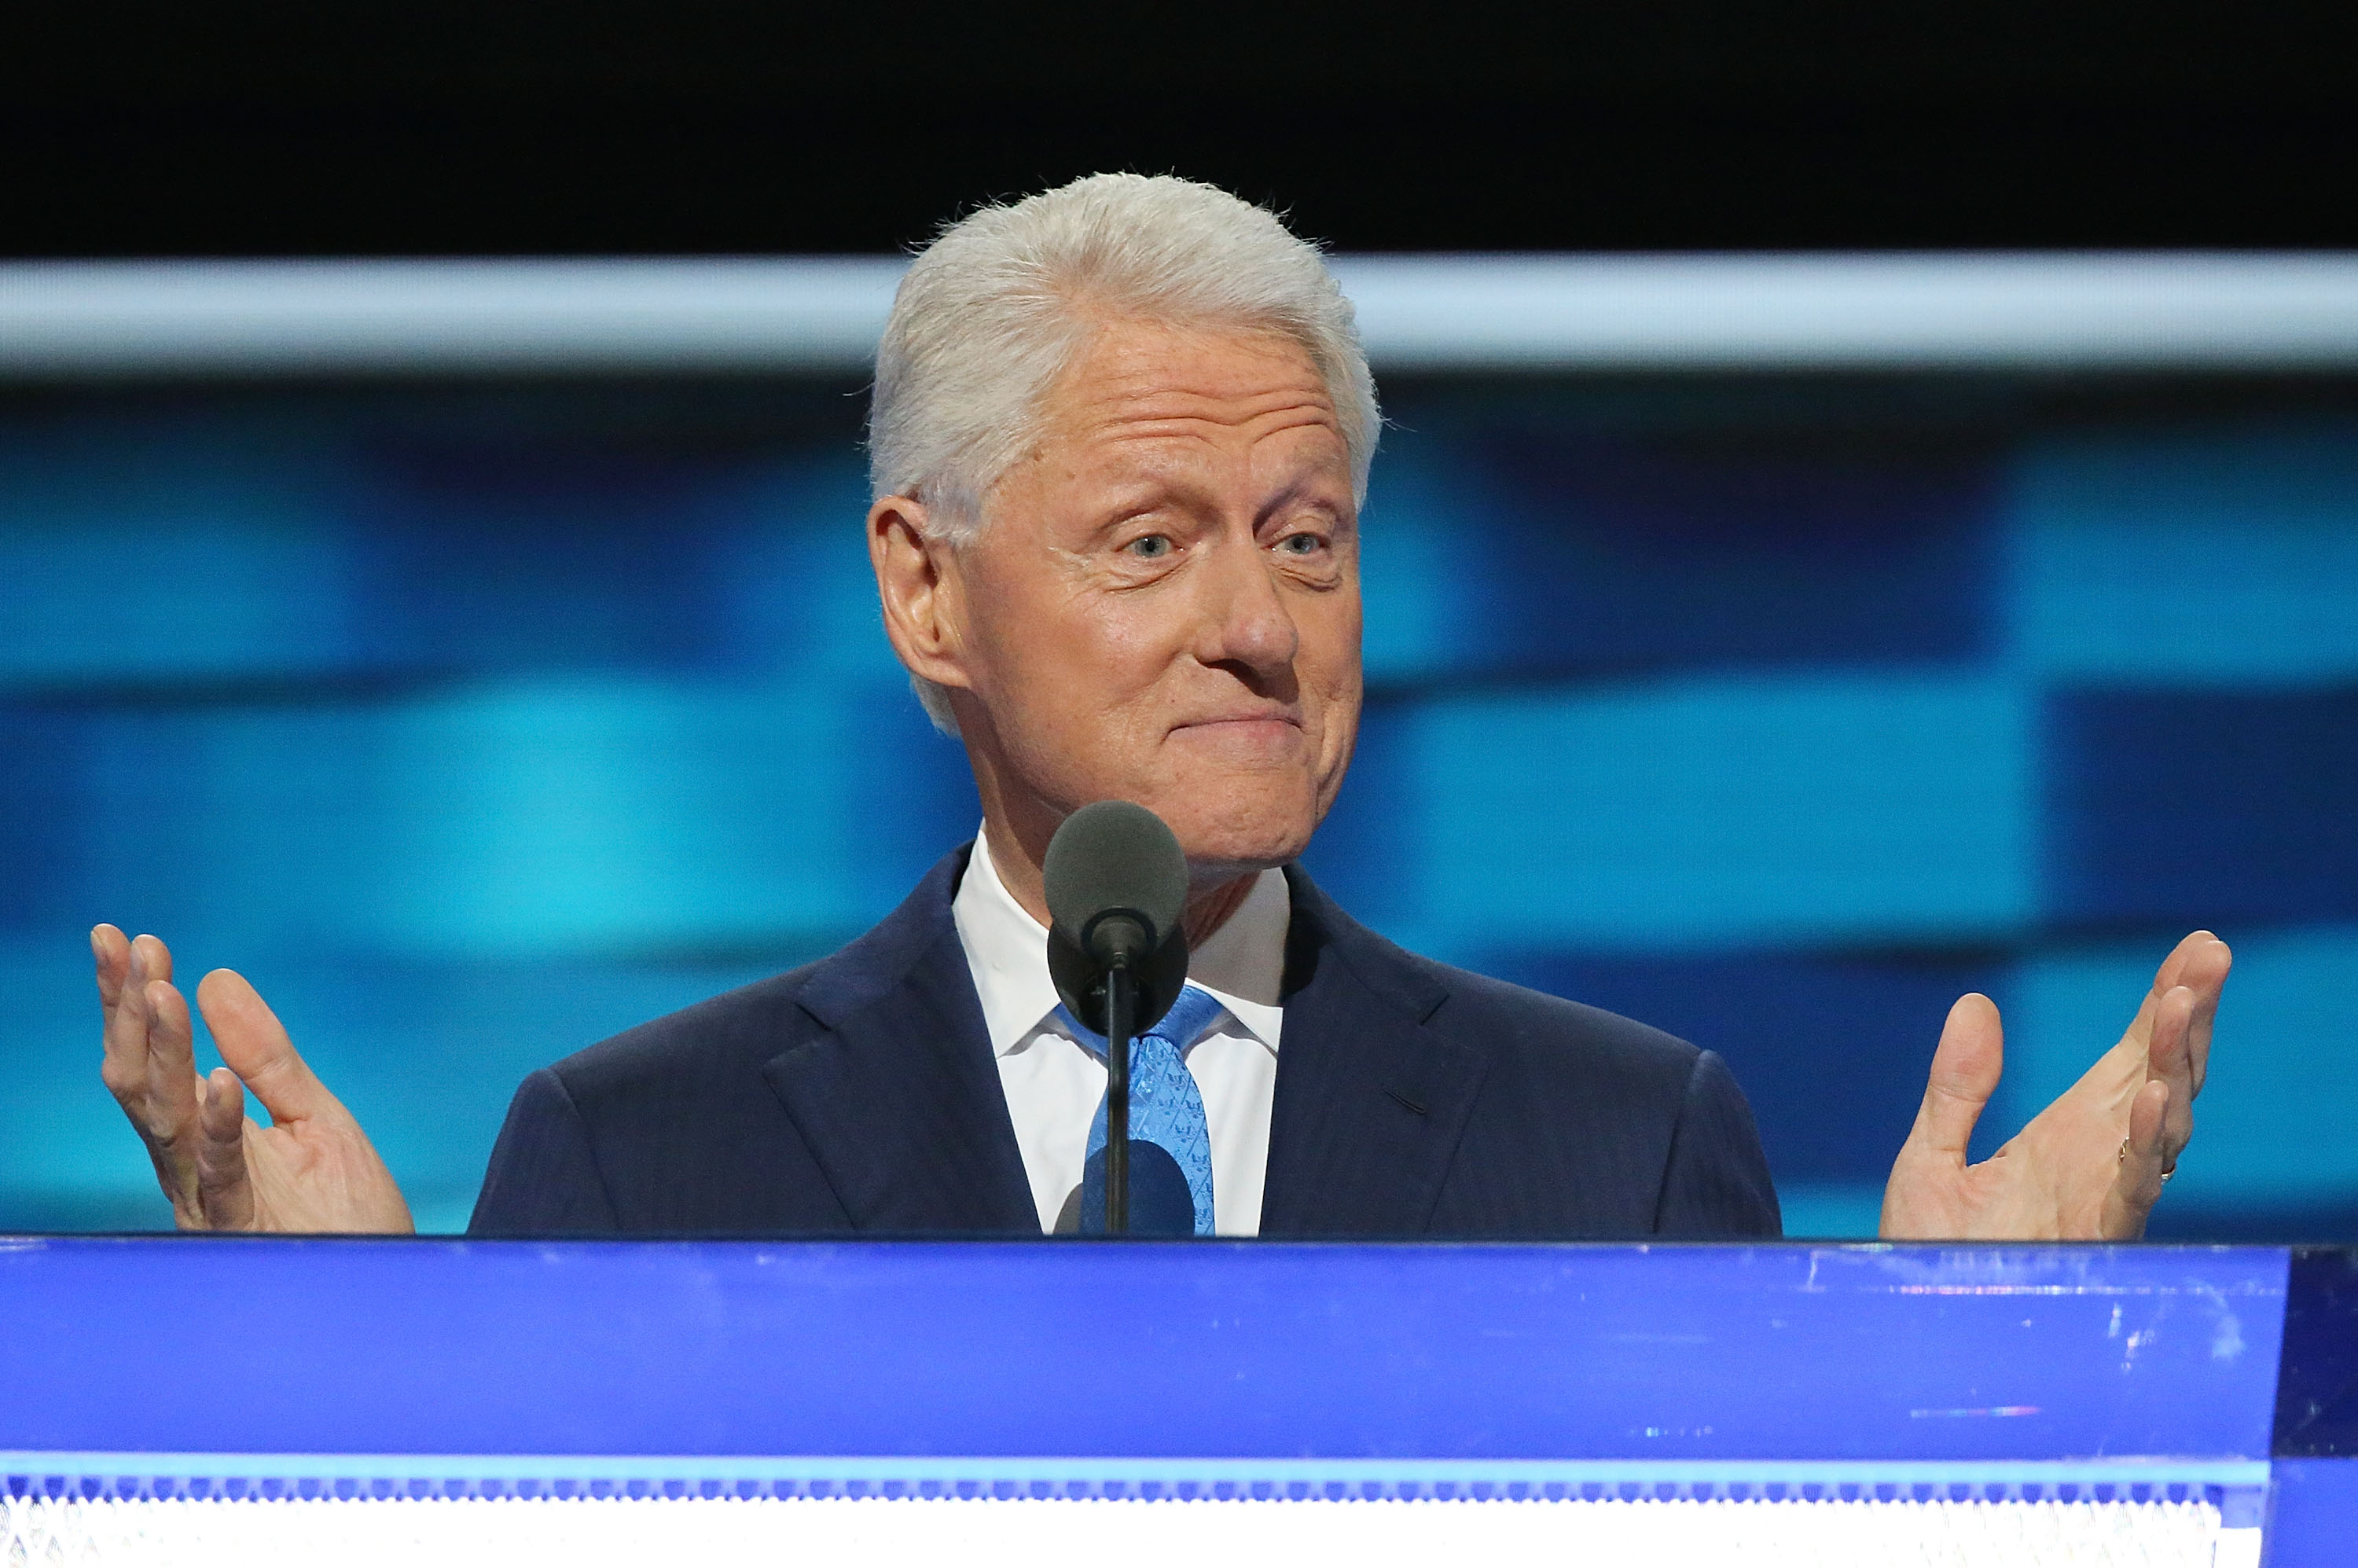 Former U.S. President Bill Clinton delivers remarks on the second day of the 2016 Democratic National Convention at Wells Fargo Center in Philadelphia on July 26, 2016. (Paul Morigi—WireImage)